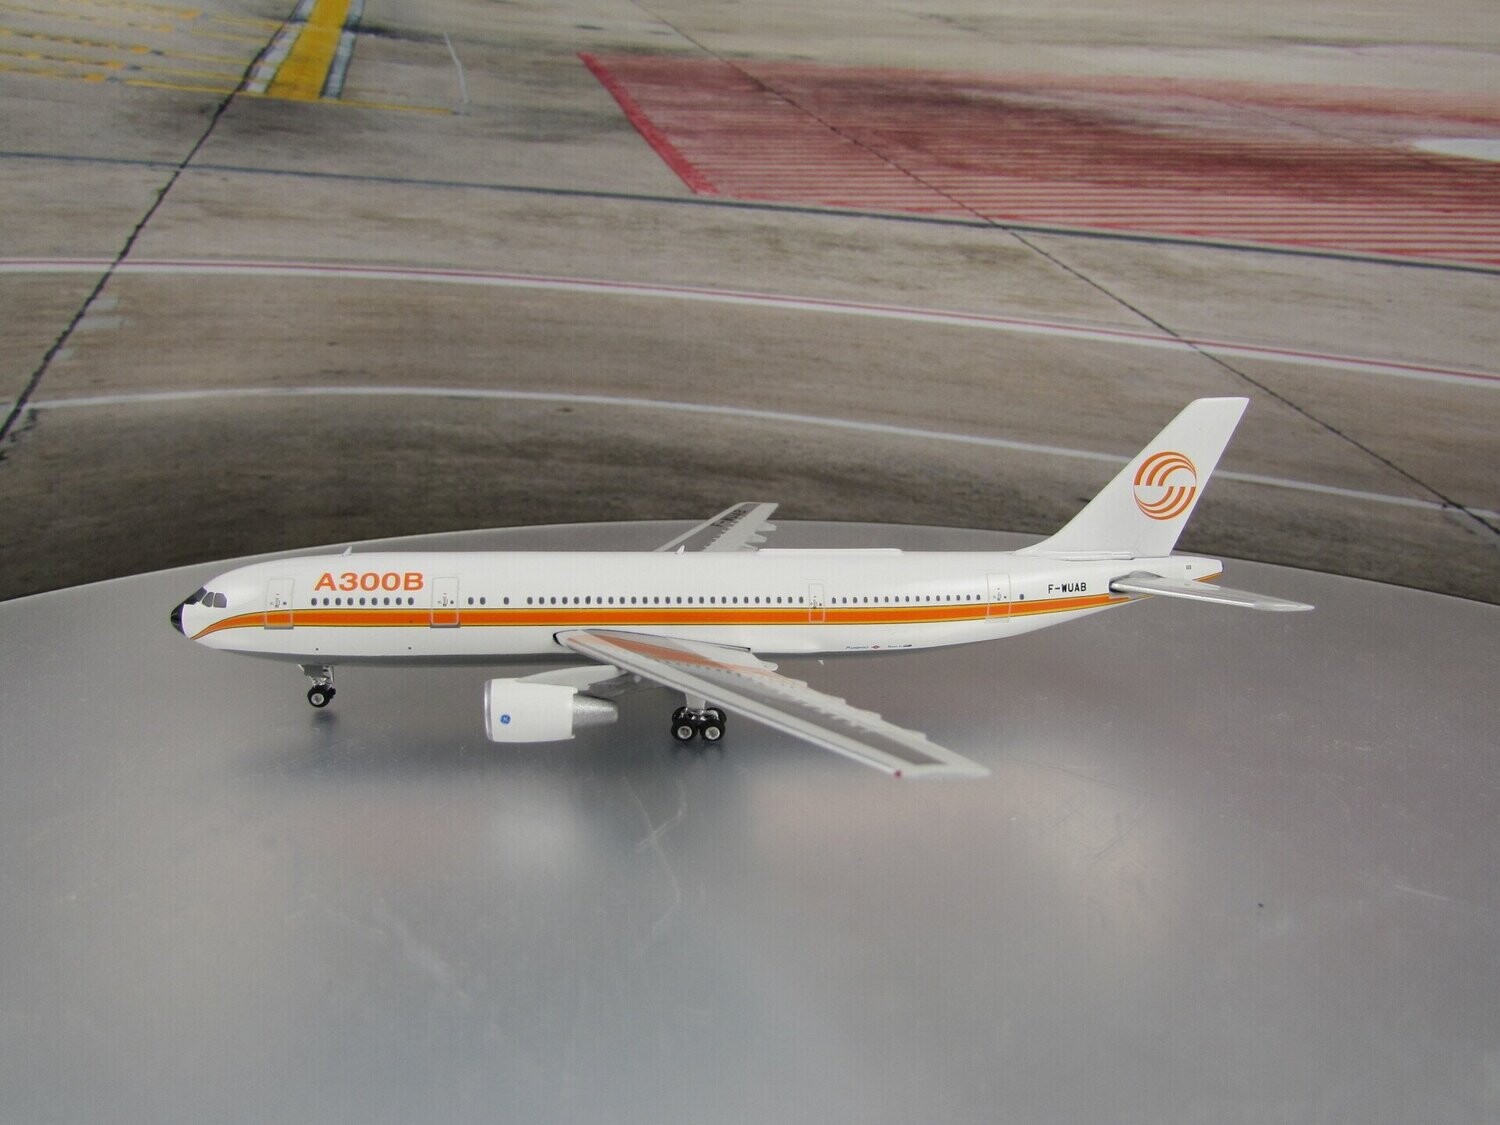 1/400 scale Airbus A300-B4-203 1970s Delivery Colors Reg No. F-WUAB